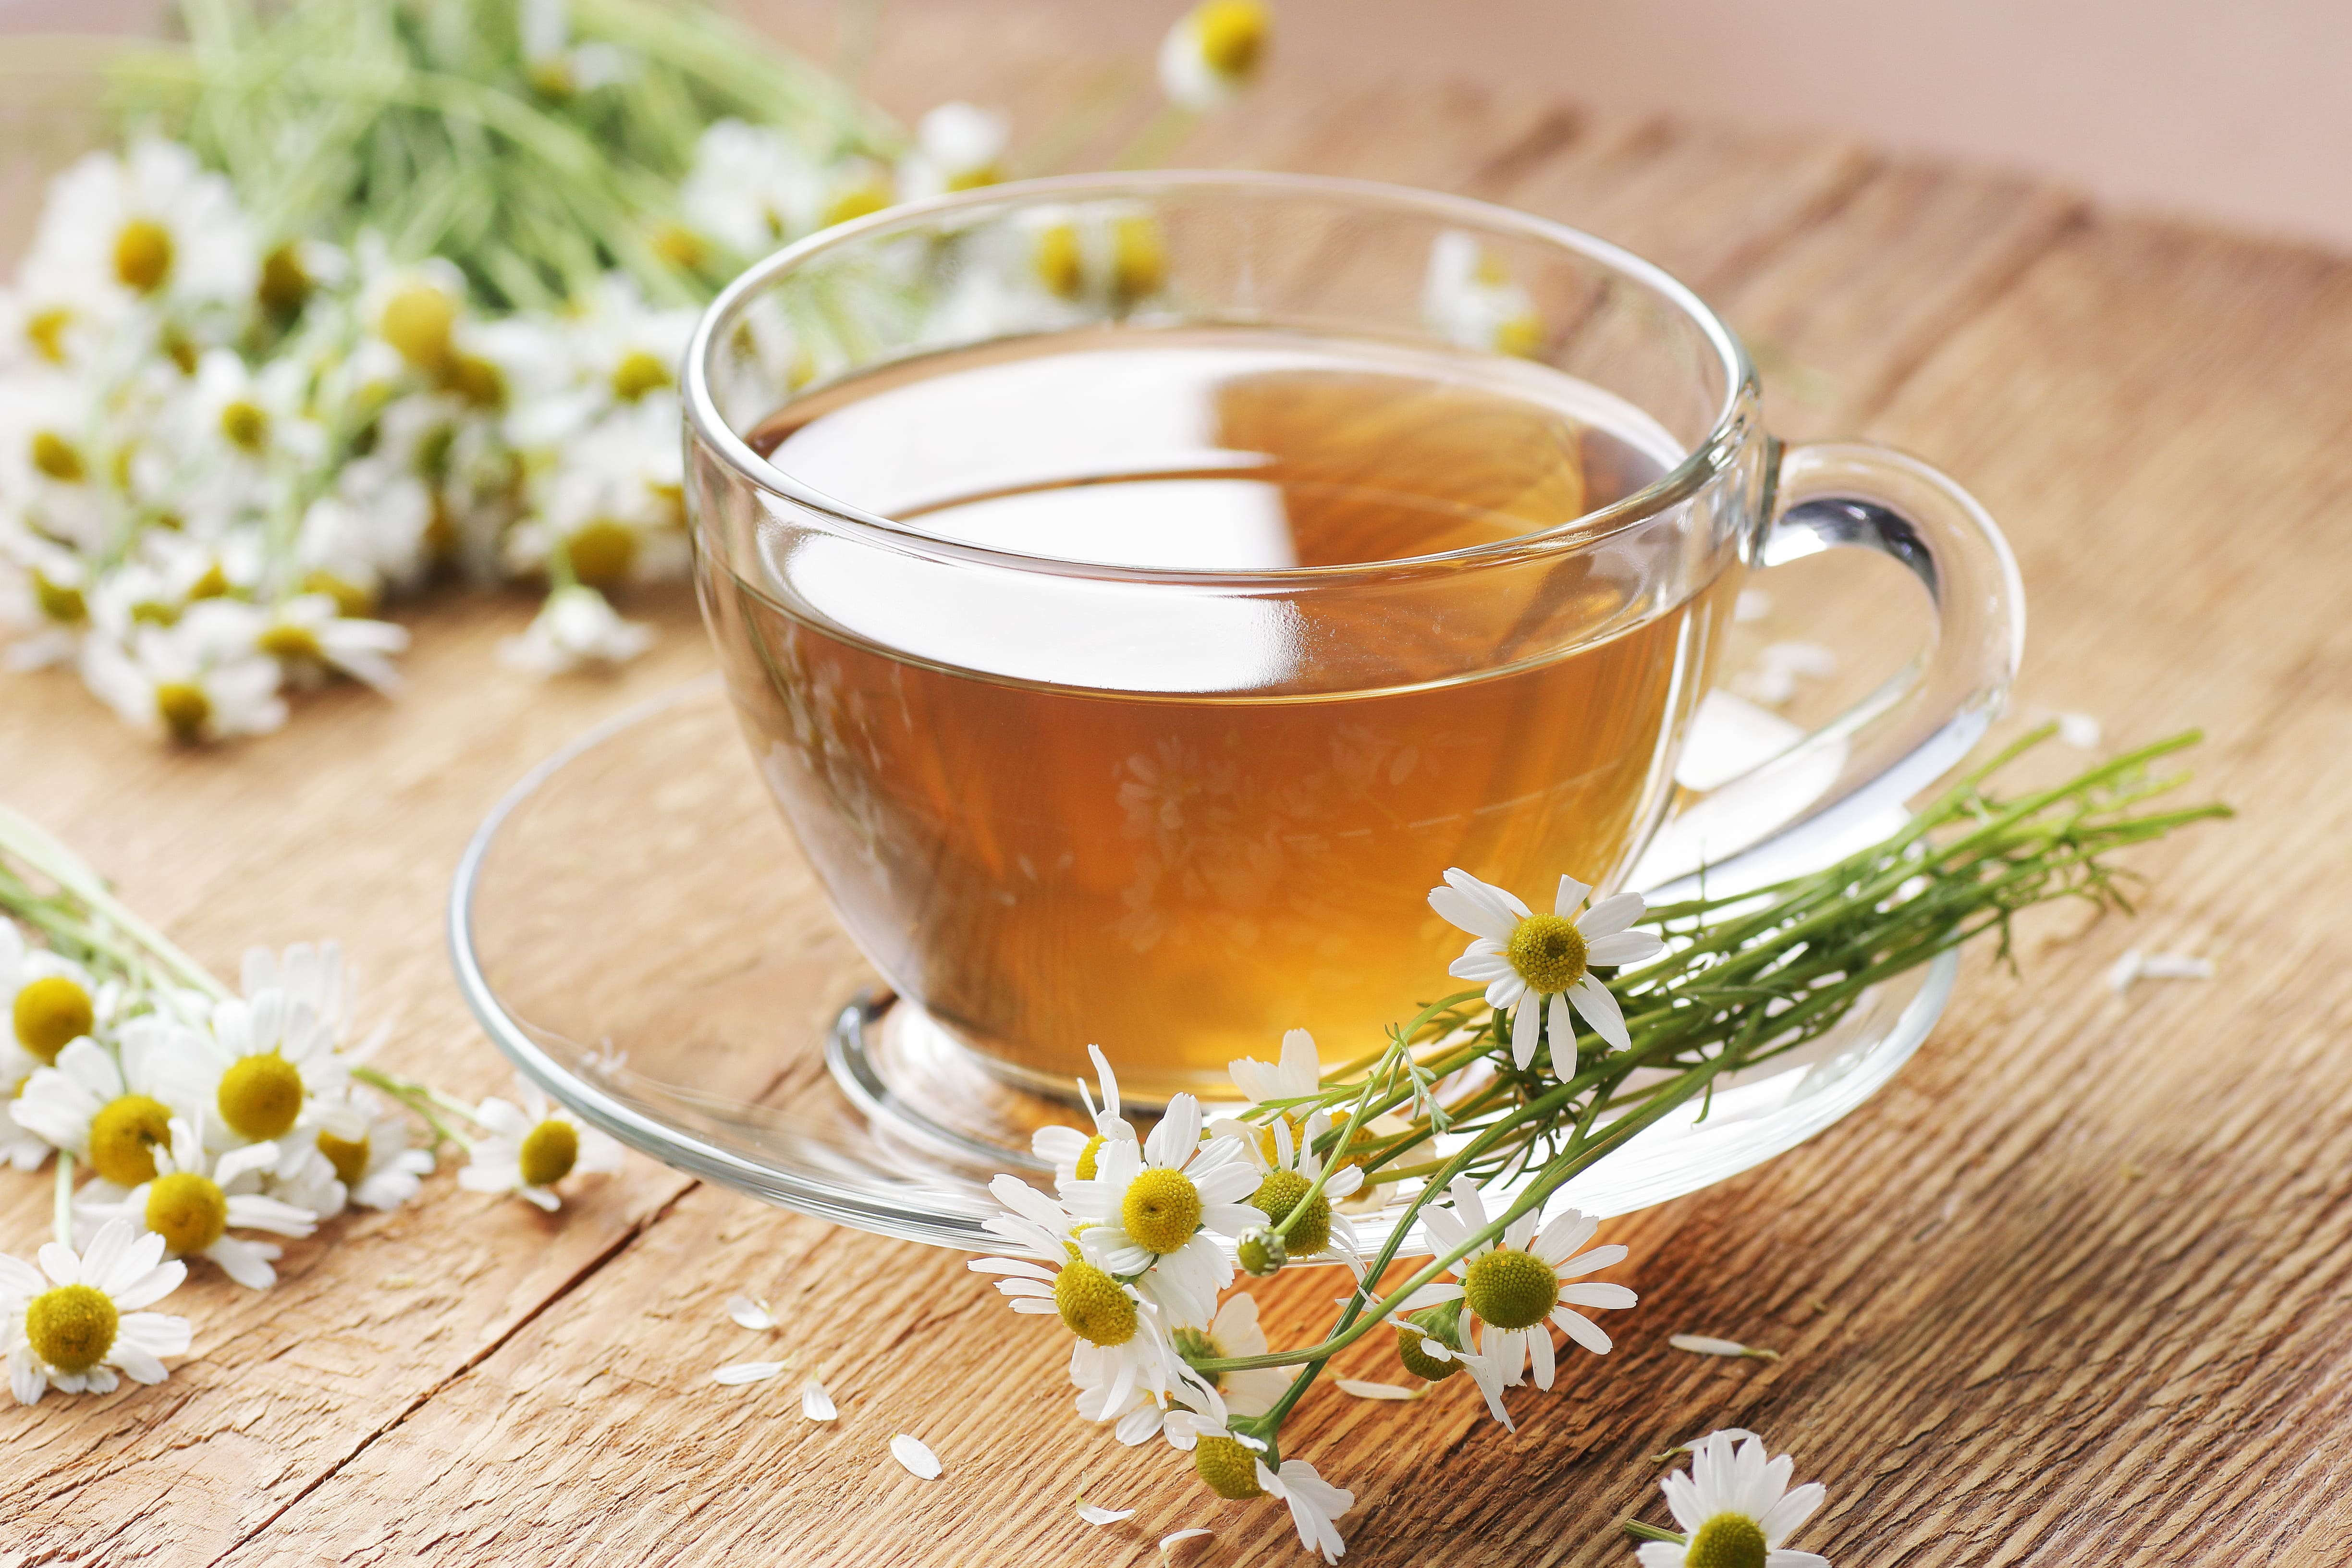 A glass mug of chamomile tea, another natural sleep remedy, with chamomile flowers scattered on the saucer and the table top